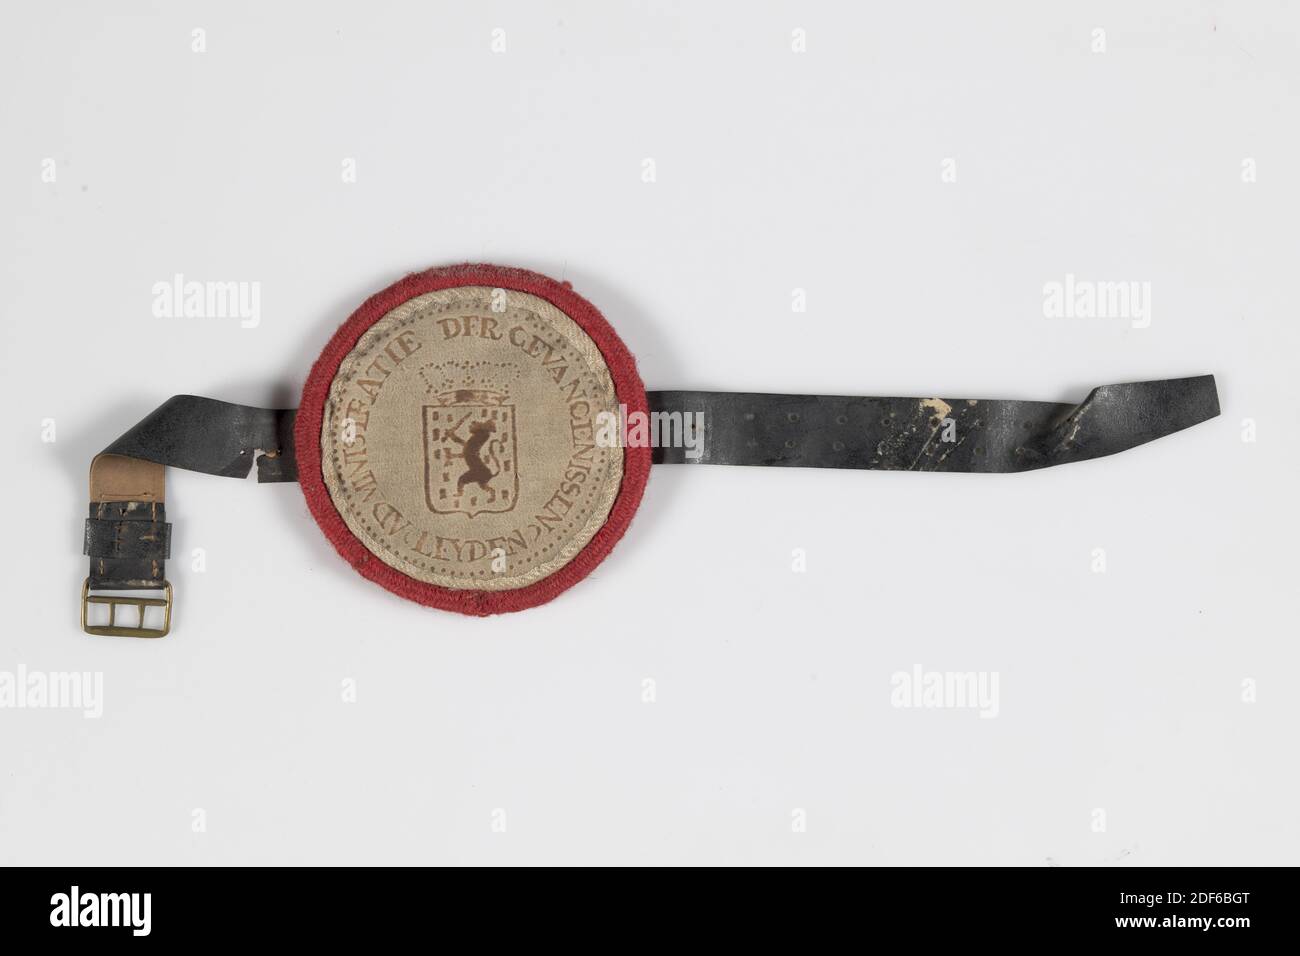 bracelet insignia, Anonymous, first half of the 19th century, cotton, linen, leather, brass, wool, sewn, General: 12 x 45 x 0.8cm 120 x 450 x 8mm, weapon sign, Bracelet intended as a way of passing through a fire in prison, consisting of a white cotton insignia with the inscription ADMINISTRATION OF THE PRISONS LEYDEN. Within the inscription is the national coat of arms of the Netherlands, consisting of a crowned shield with a crowned lion climbing with a sword. A white linen edge is sewn around the insige with a red wool edge around it. The back of the insignia is plain. A black leather strap Stock Photo